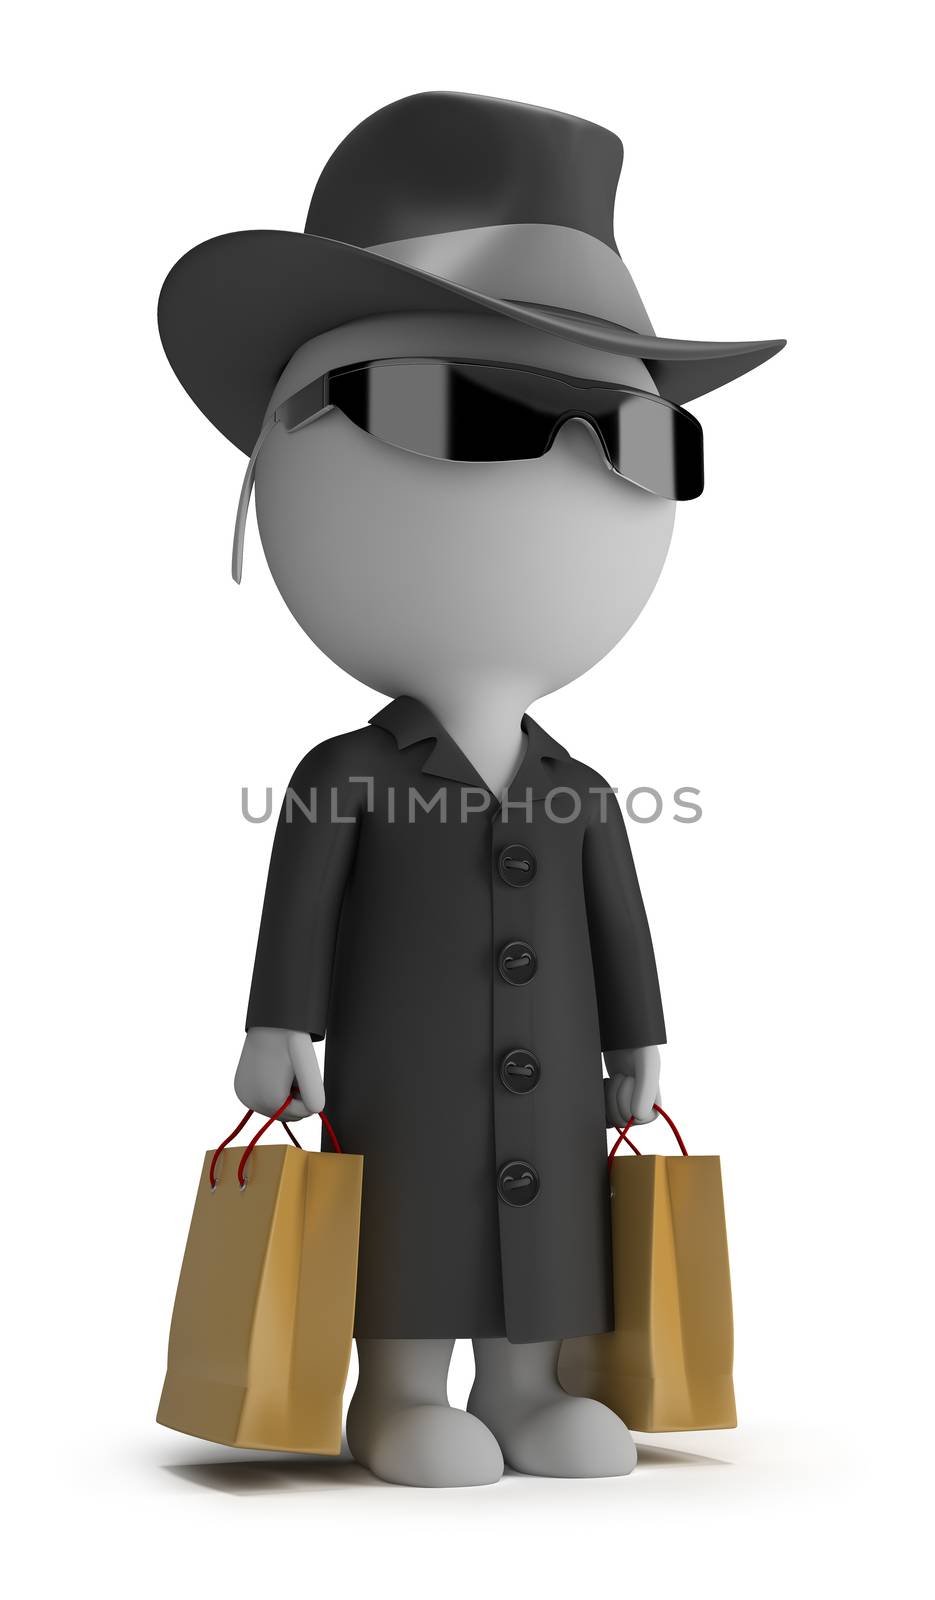 3d small person - mystery shopper in a black coat, sunglasses, hat, and with packages. 3d image. Isolated white background.